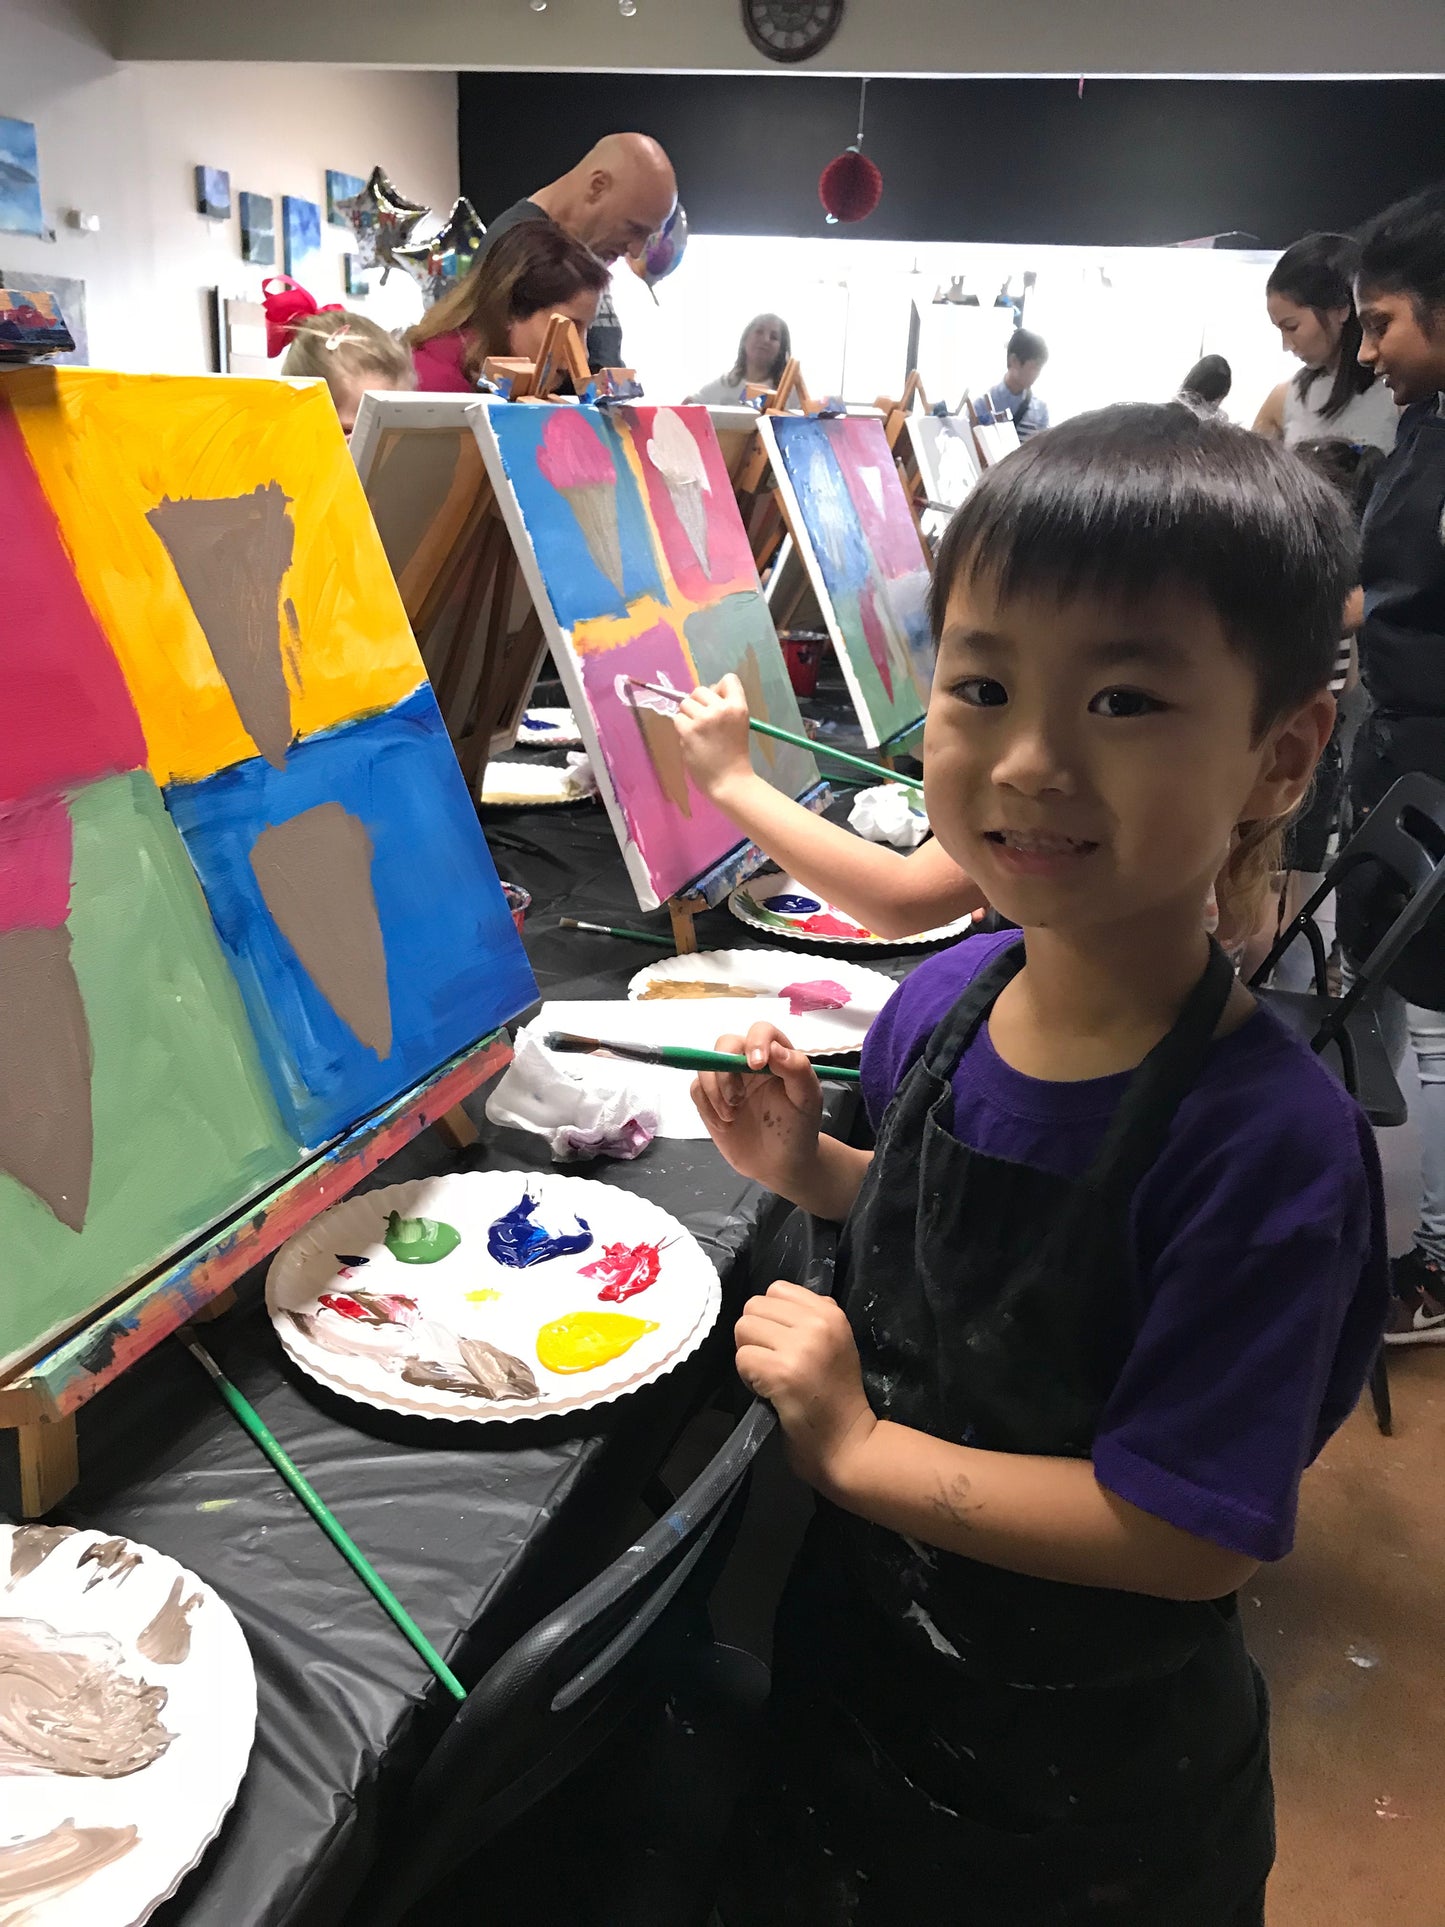 Wed, Jan 31, 4-6pm “City at Night” Public Houston Kids Painting Class